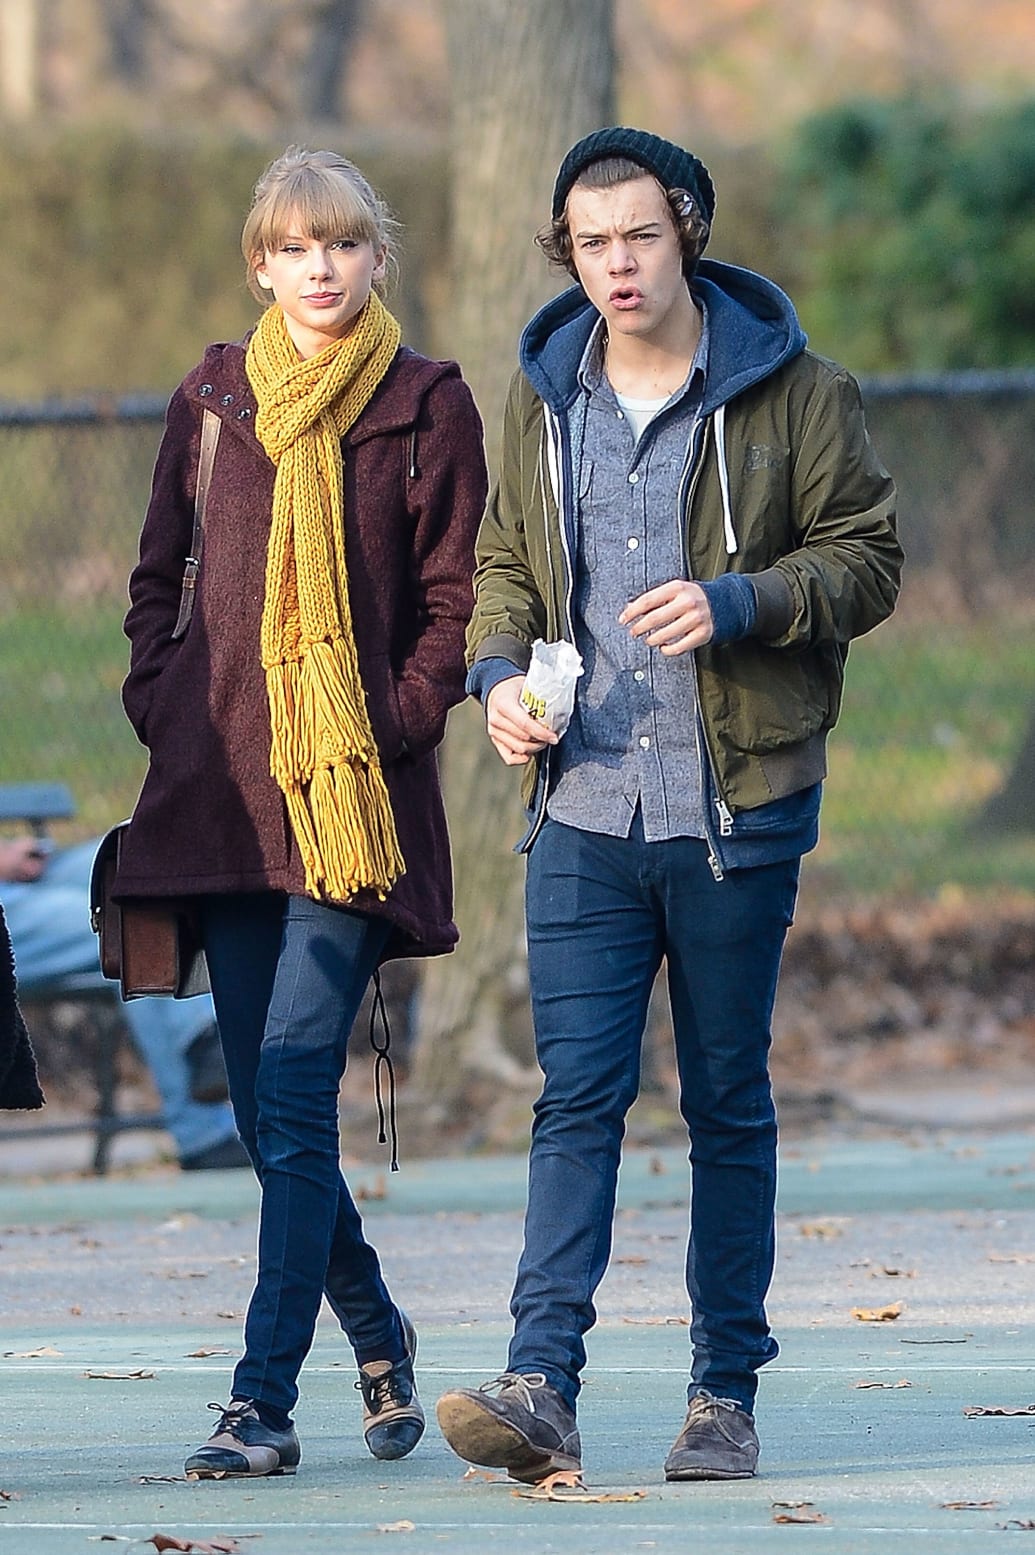 A photo including Taylor Swift and Harry Styles